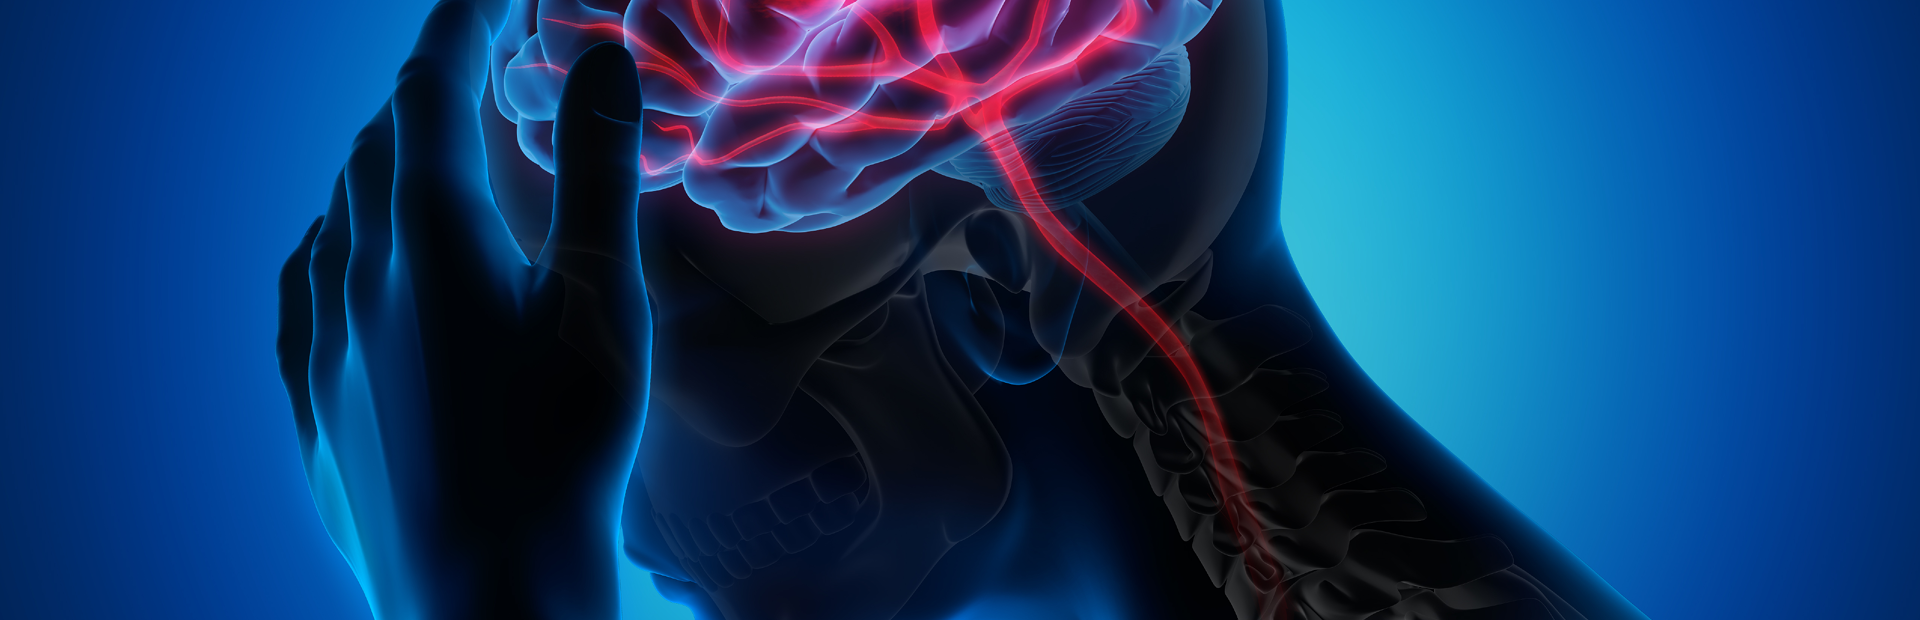 Check out our quick tips on treating a stroke with our assessments and protocols below | ACLS